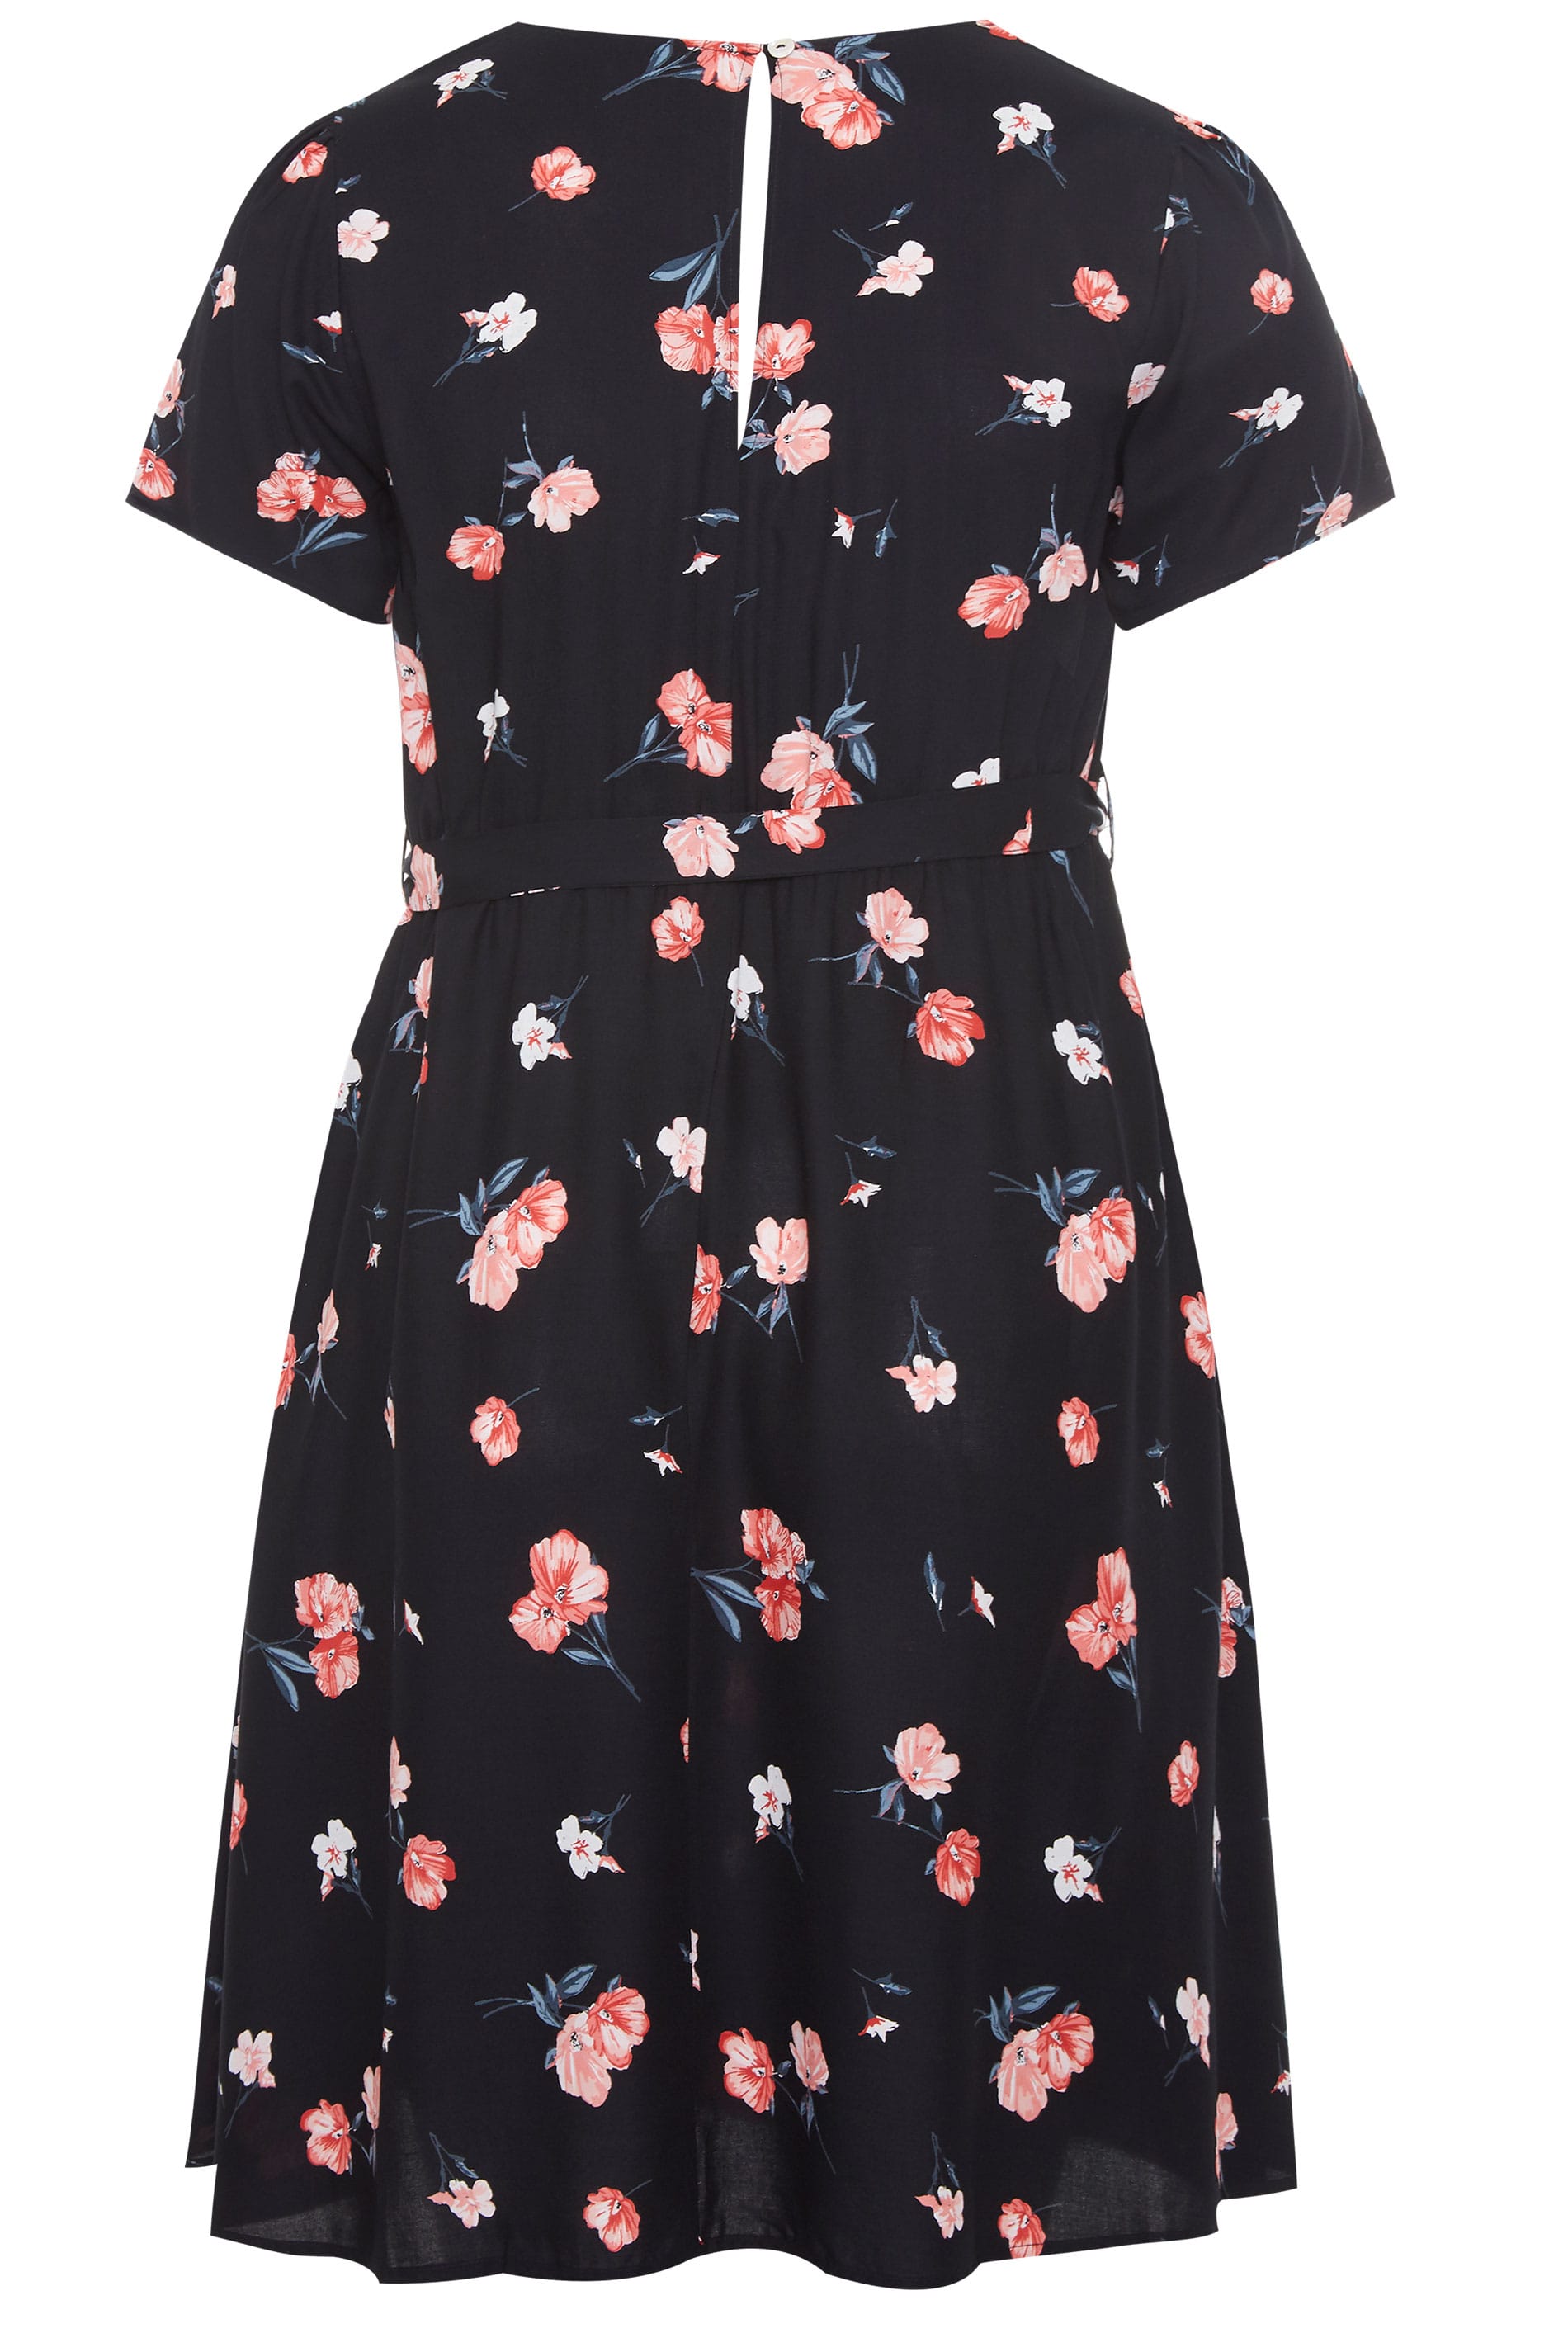 Black Floral Pleat Neck Dress | Yours Clothing